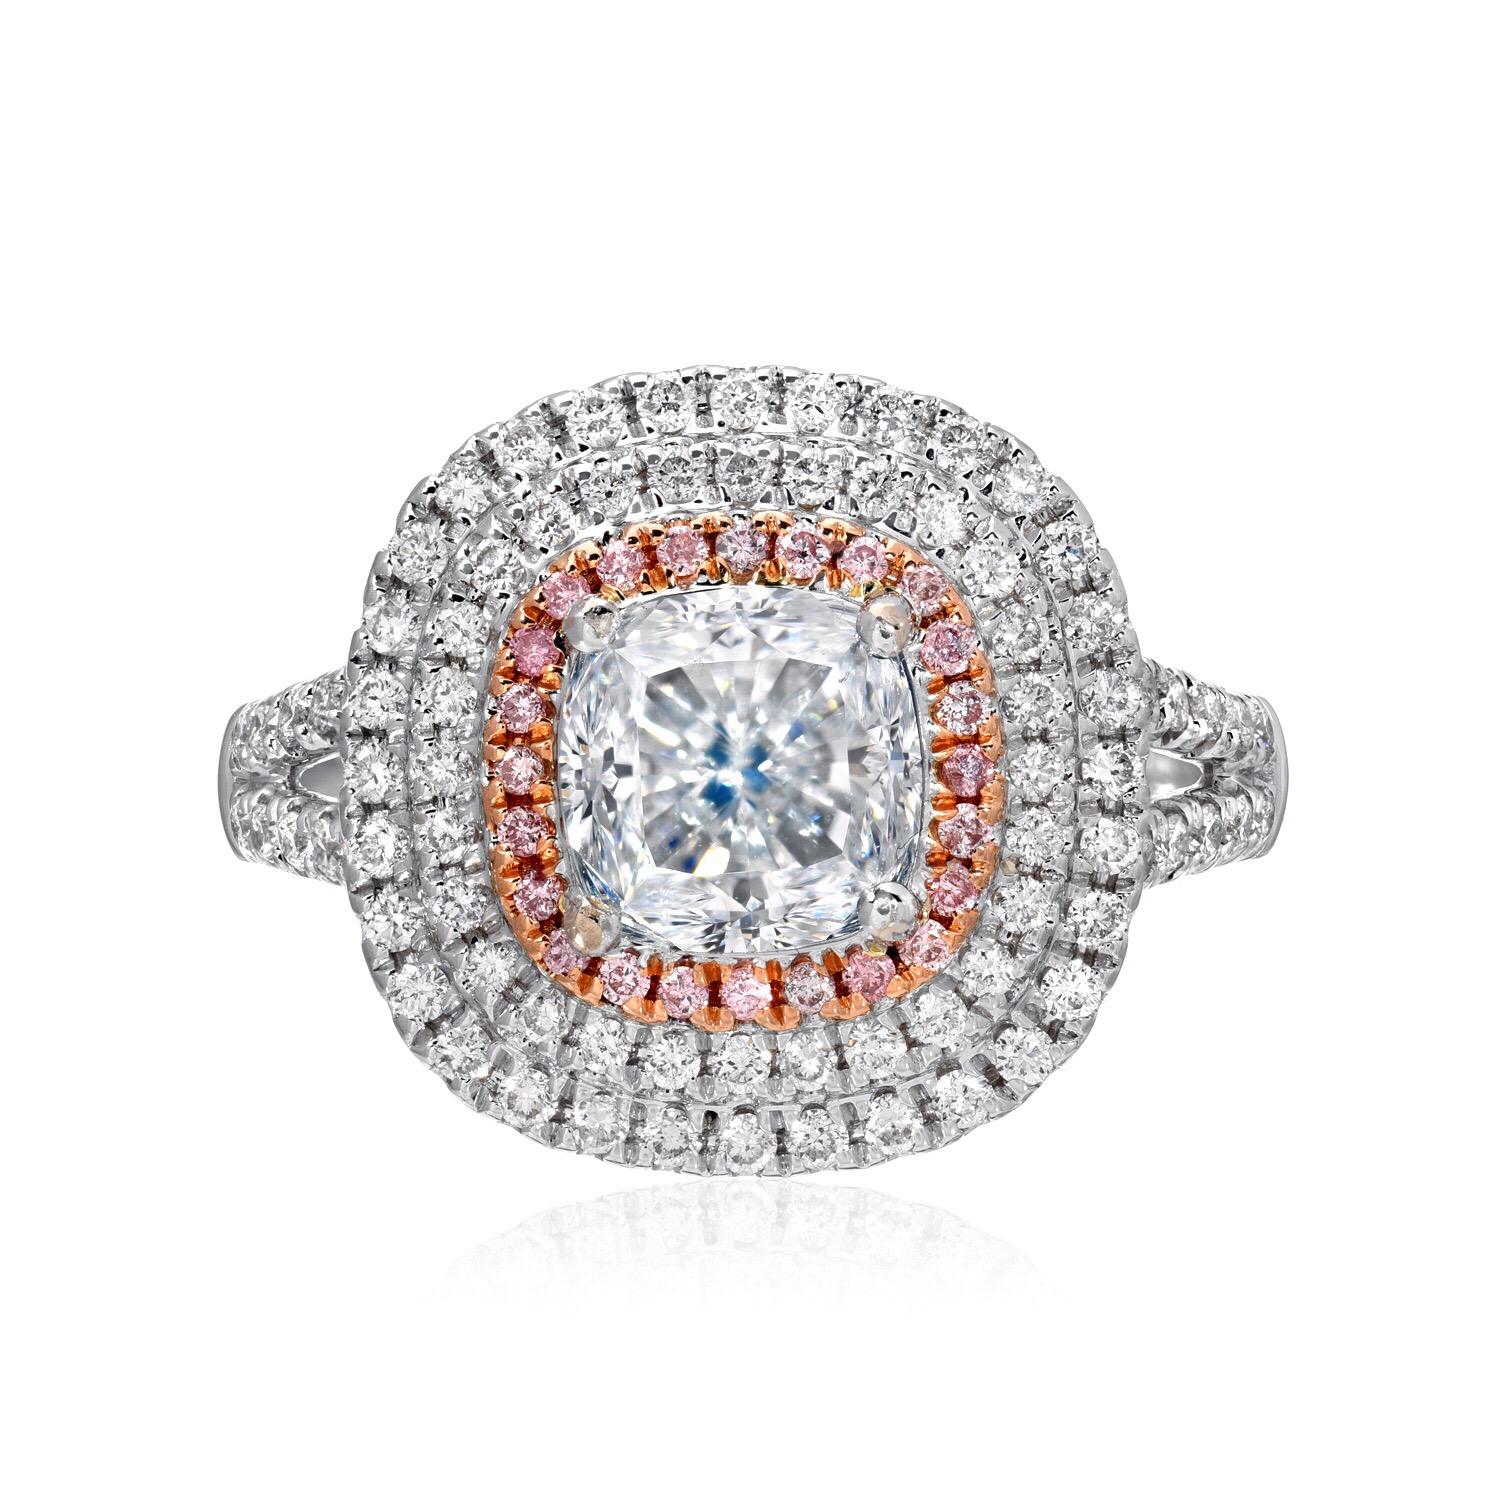 Spectacular G.I.A certified 2.01 carat, natural light blue diamond cushion cut, SI1 clarity, set in a 18K white and rose gold cocktail or diamond engagement ring, adorned by a total of 0.10 carat pink diamonds and 0.56 carats of round brilliant